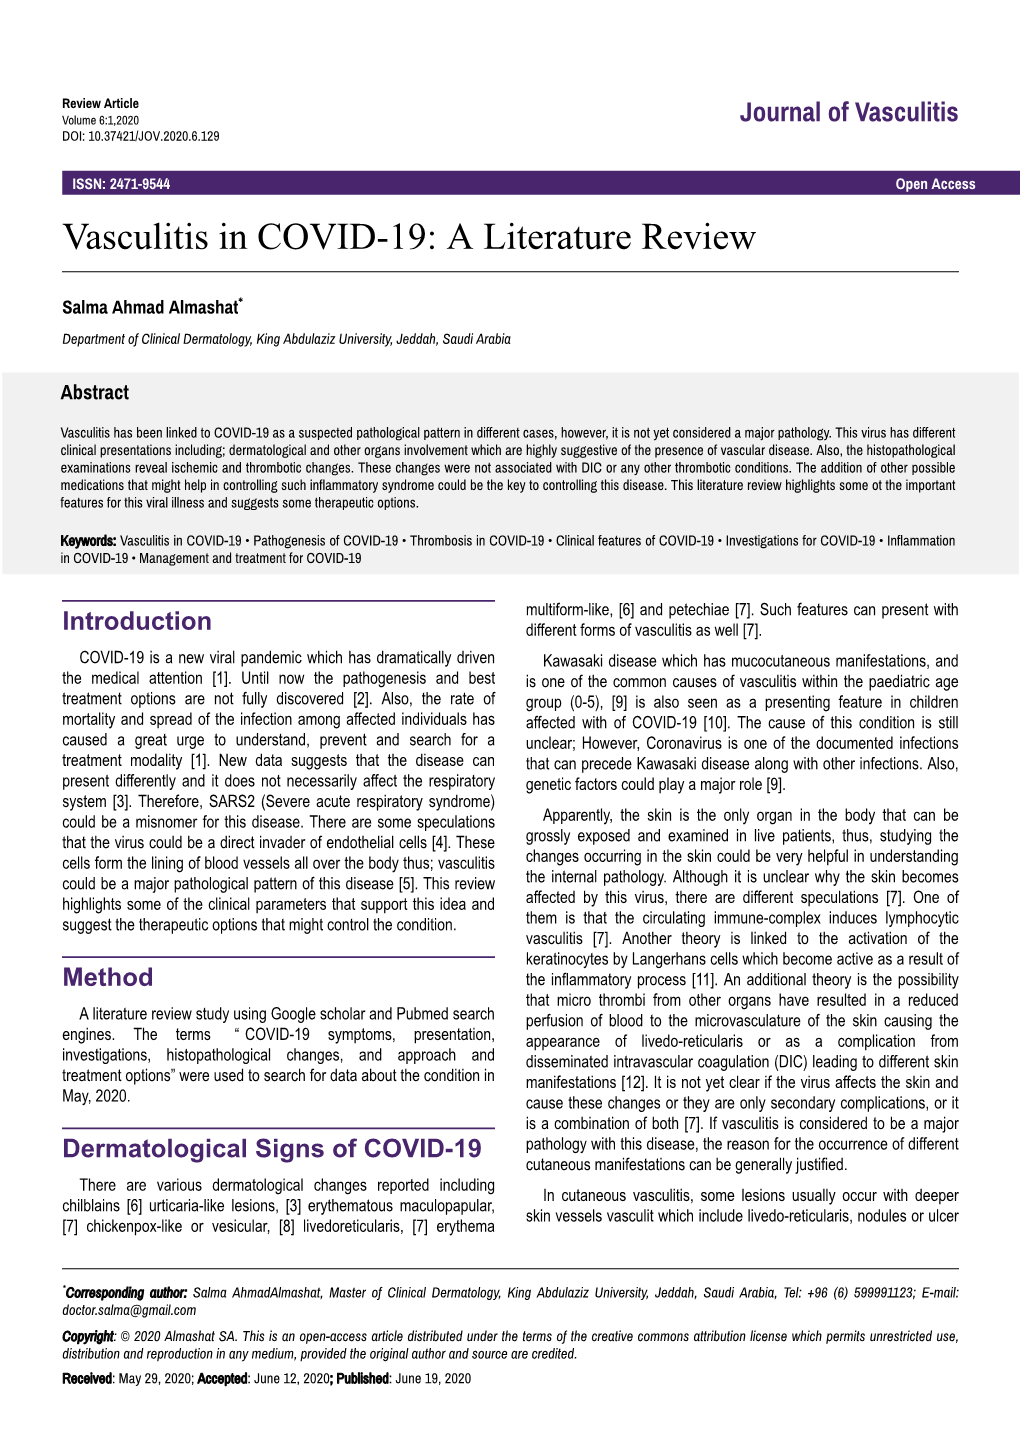 Vasculitis in COVID-19: a Literature Review